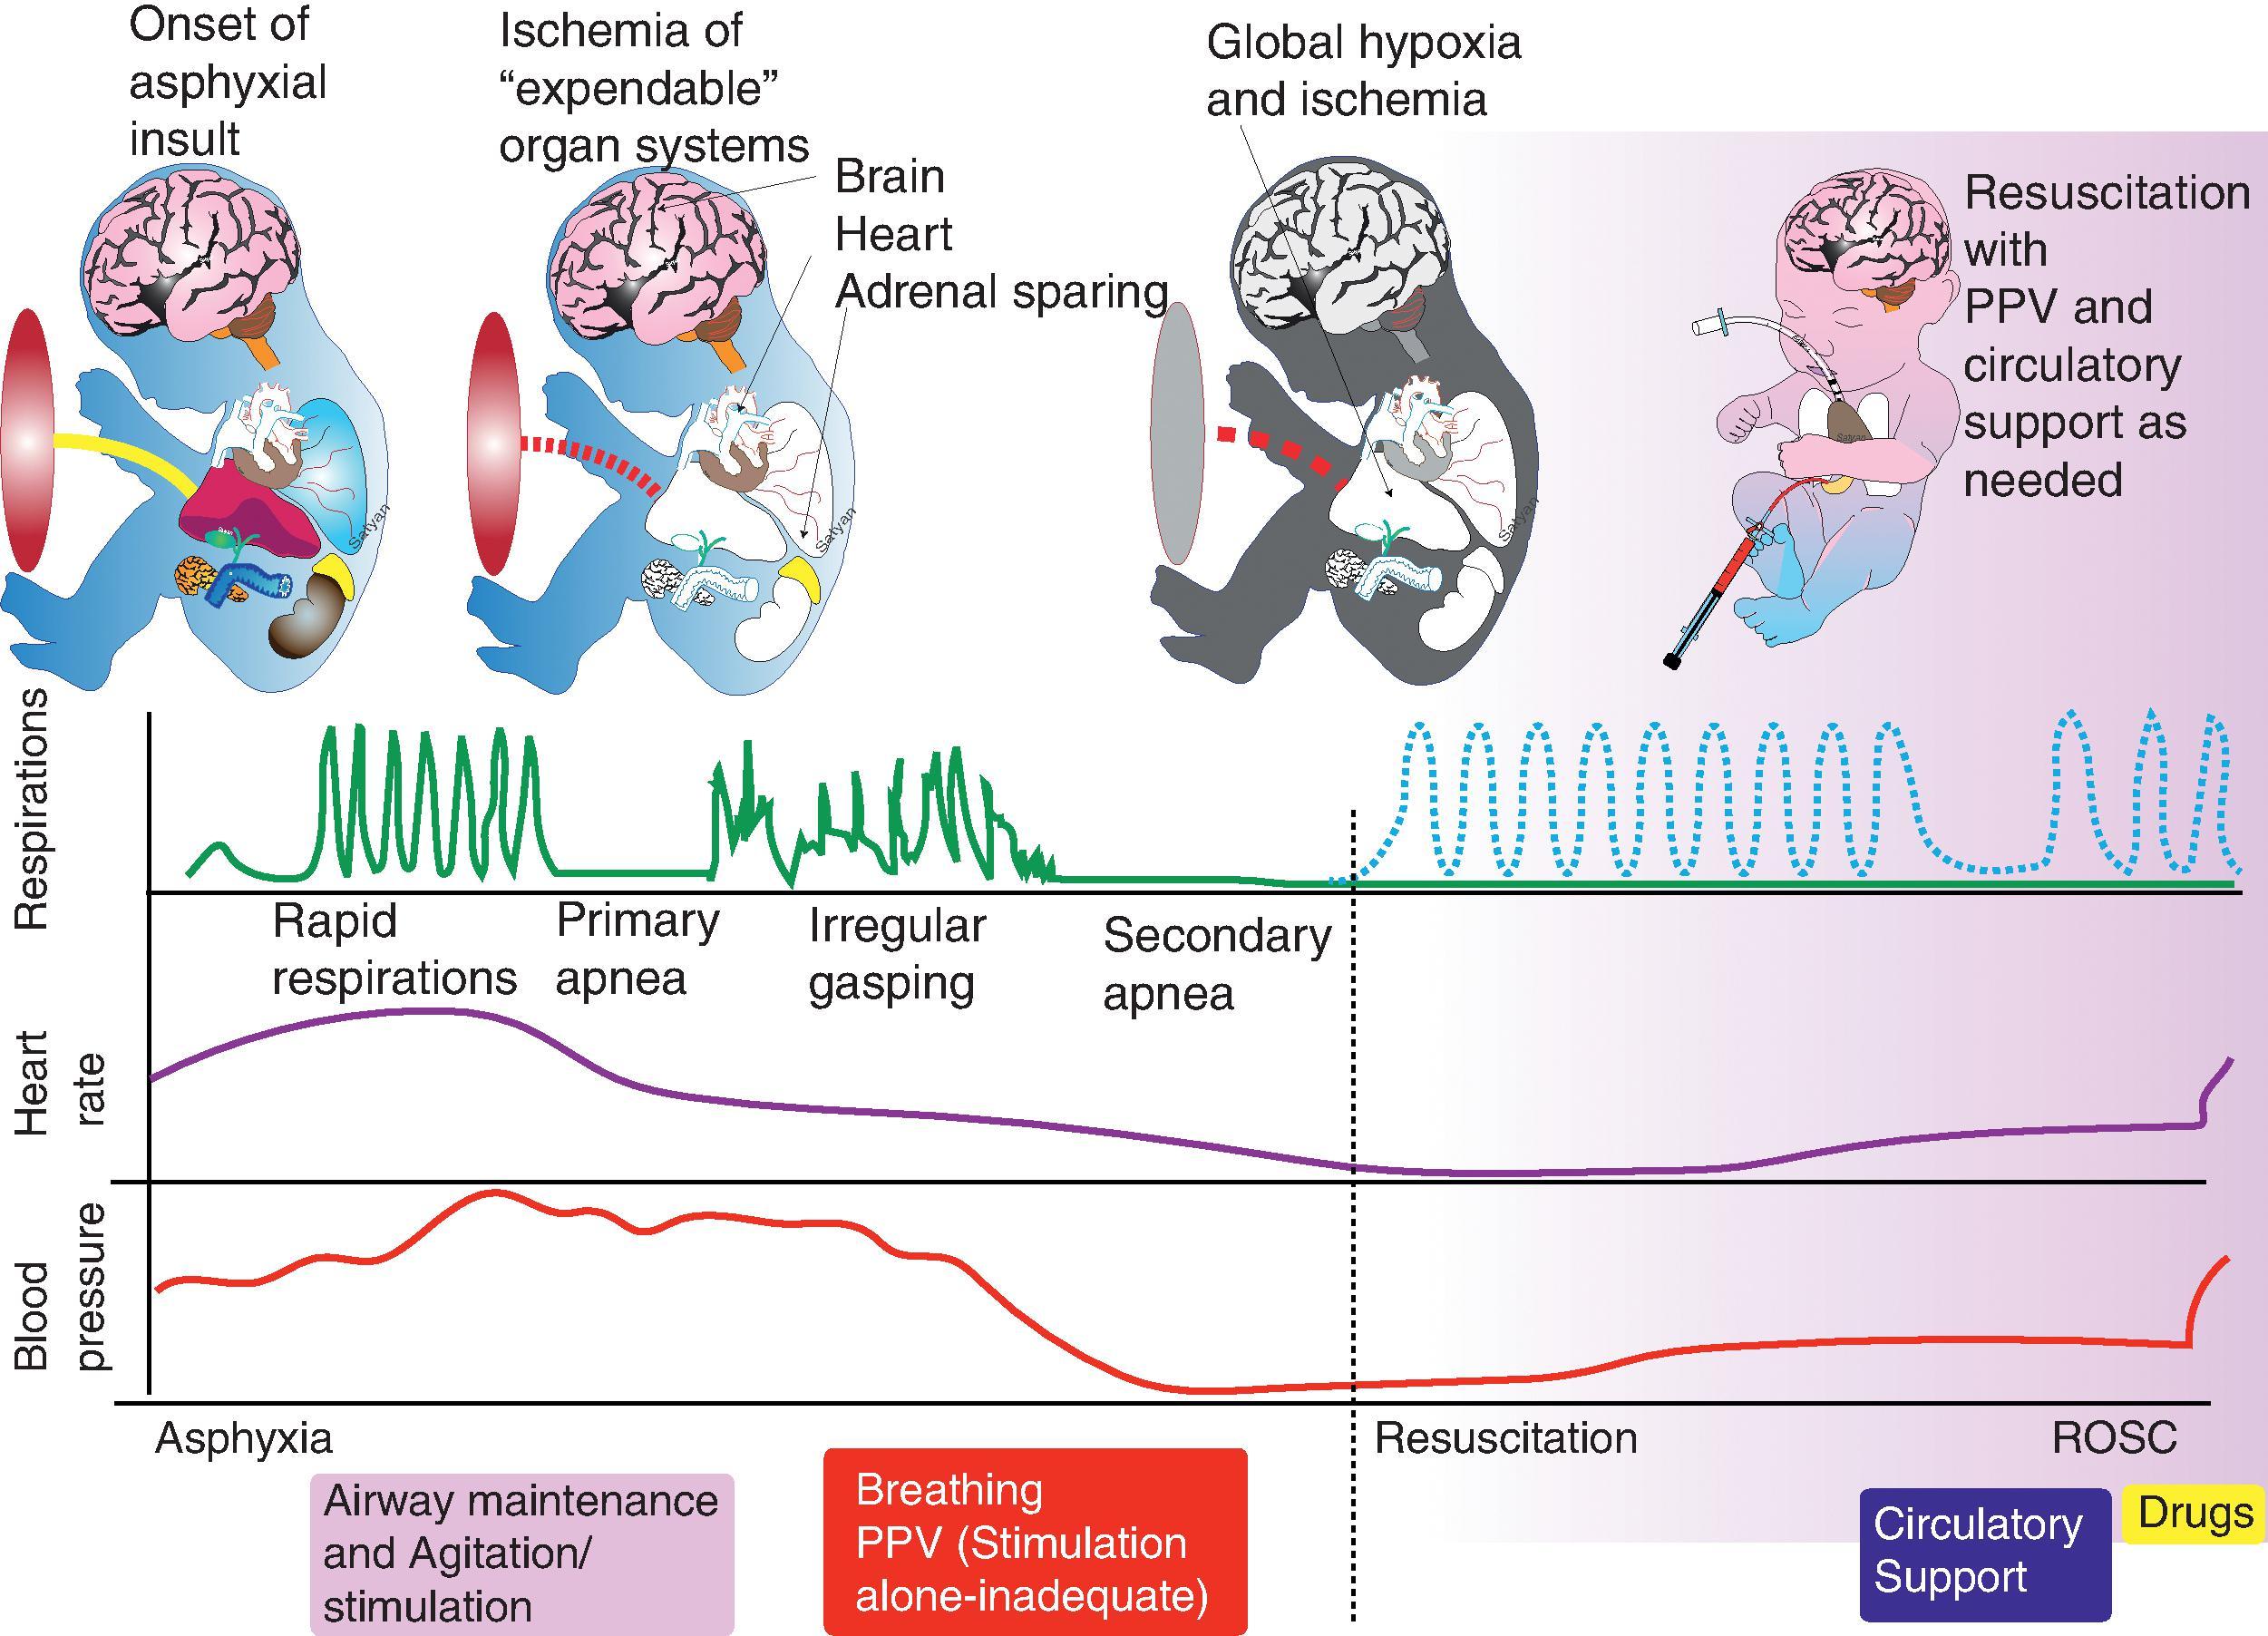 Fig. 8.2, Pathophysiology of Asphyxia and Resuscitation .